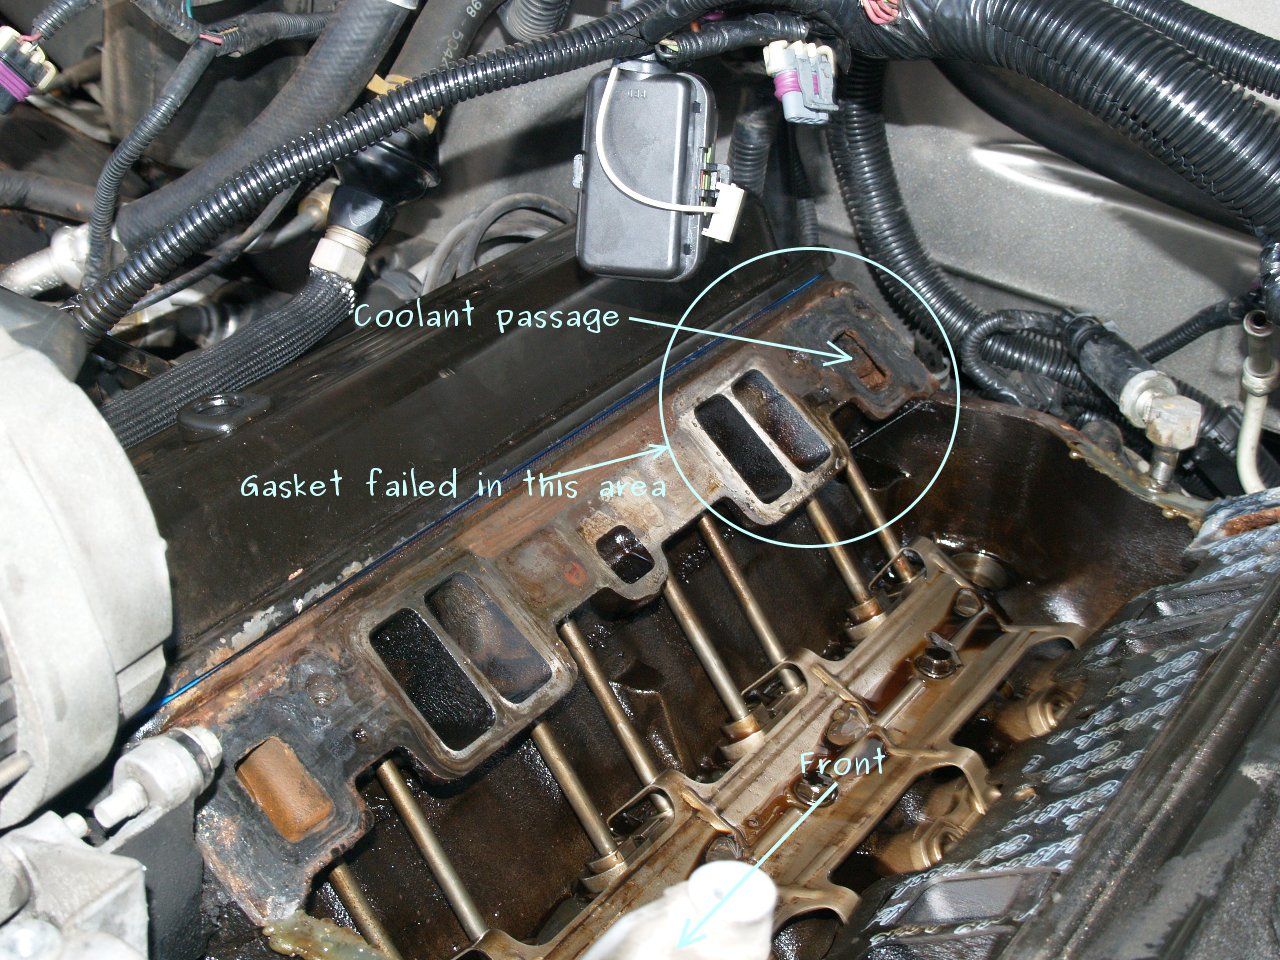 See P0757 in engine